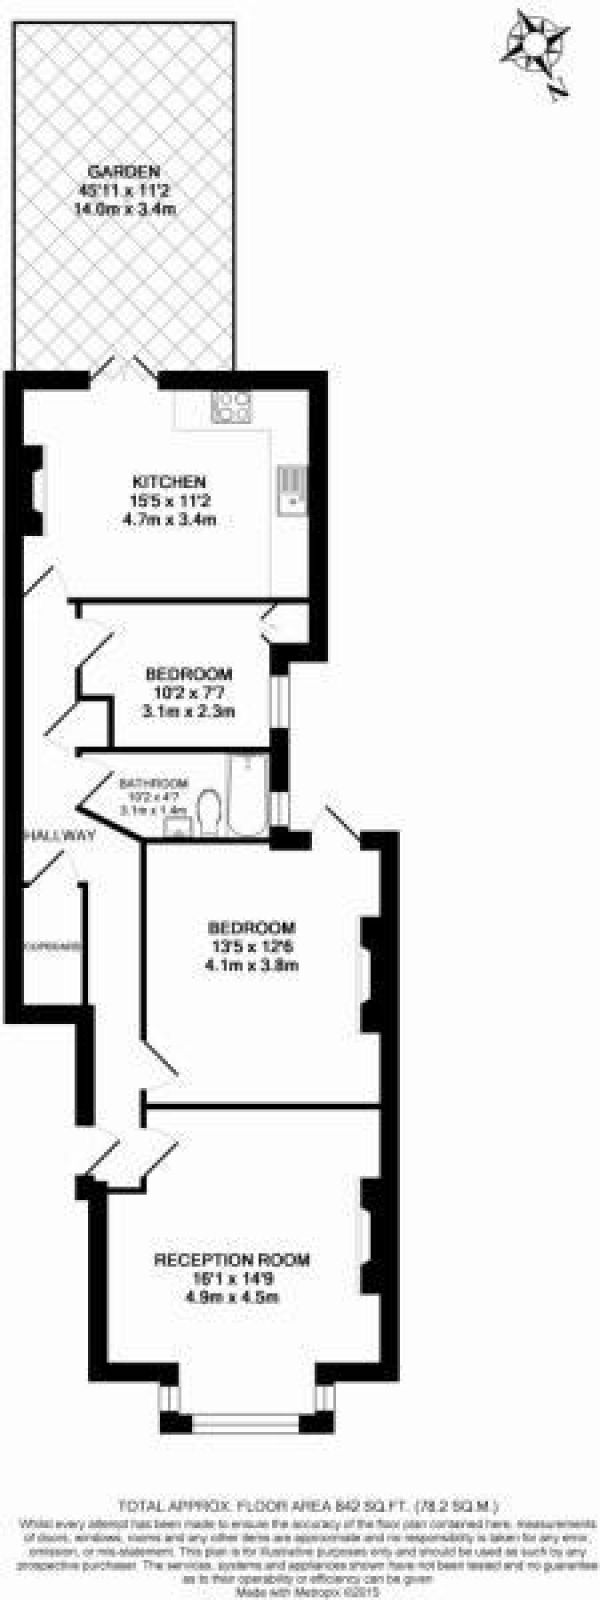 Floor Plan Image for 2 Bedroom Apartment to Rent in Minet Avenue, London